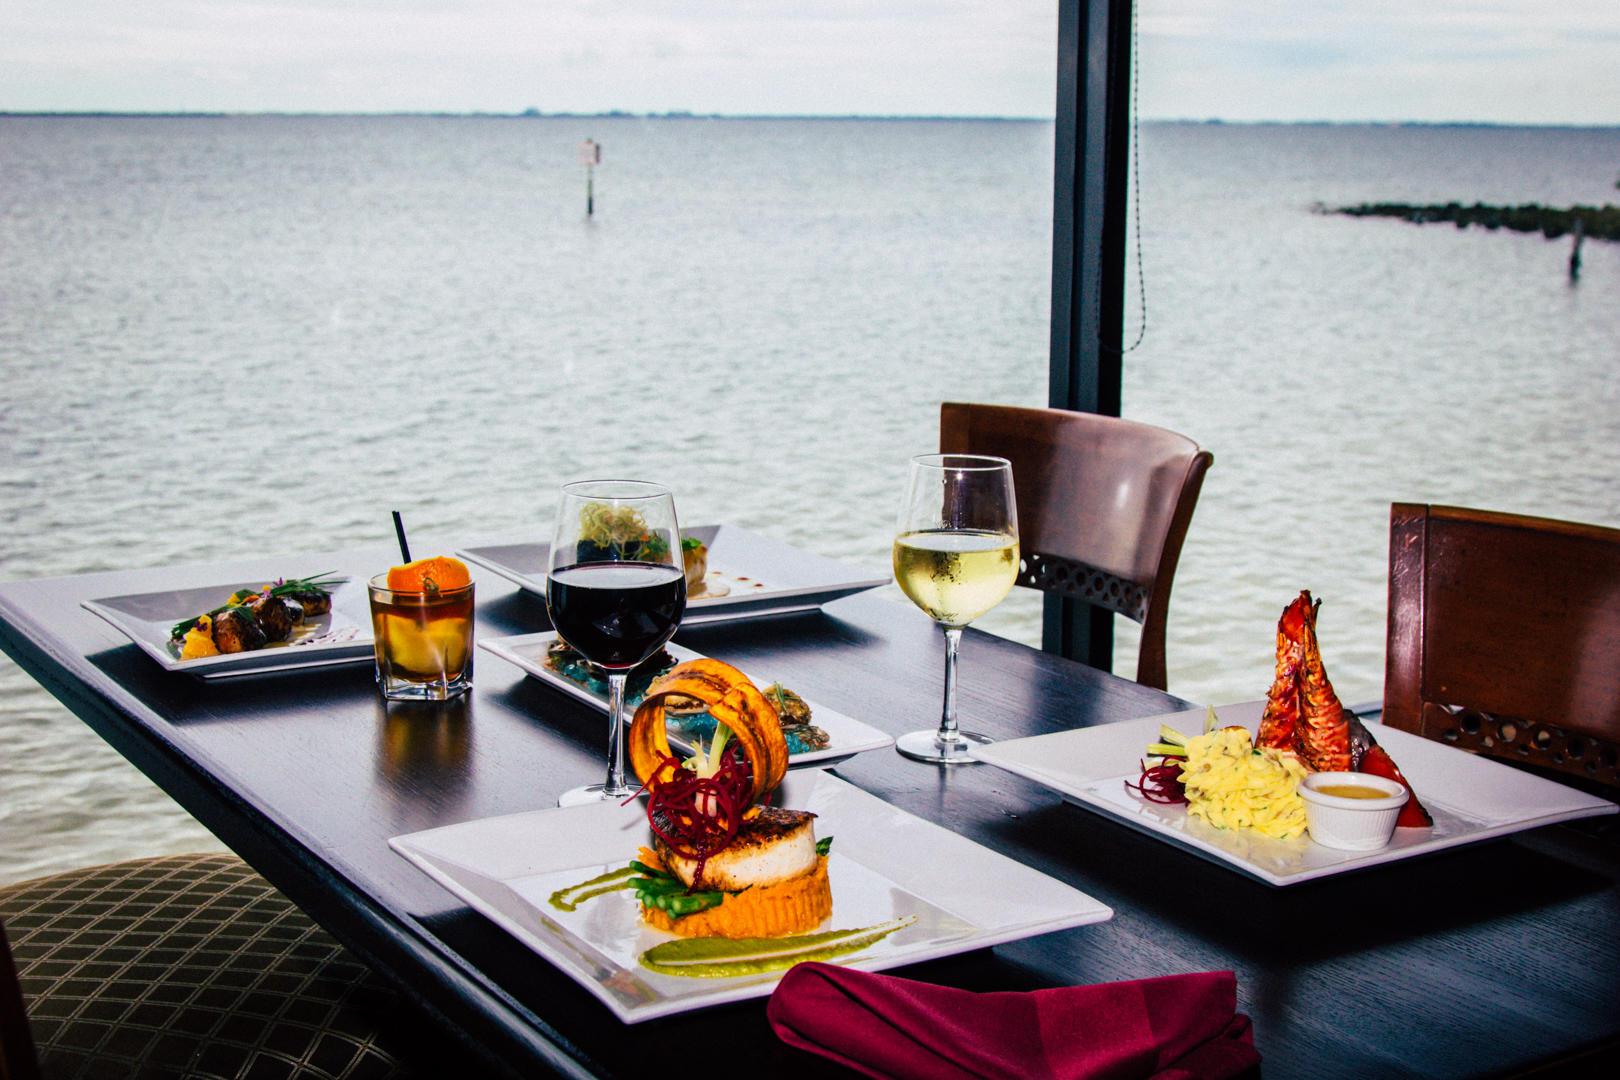 Waterfront views for Brunch, Lunch and Dinner.